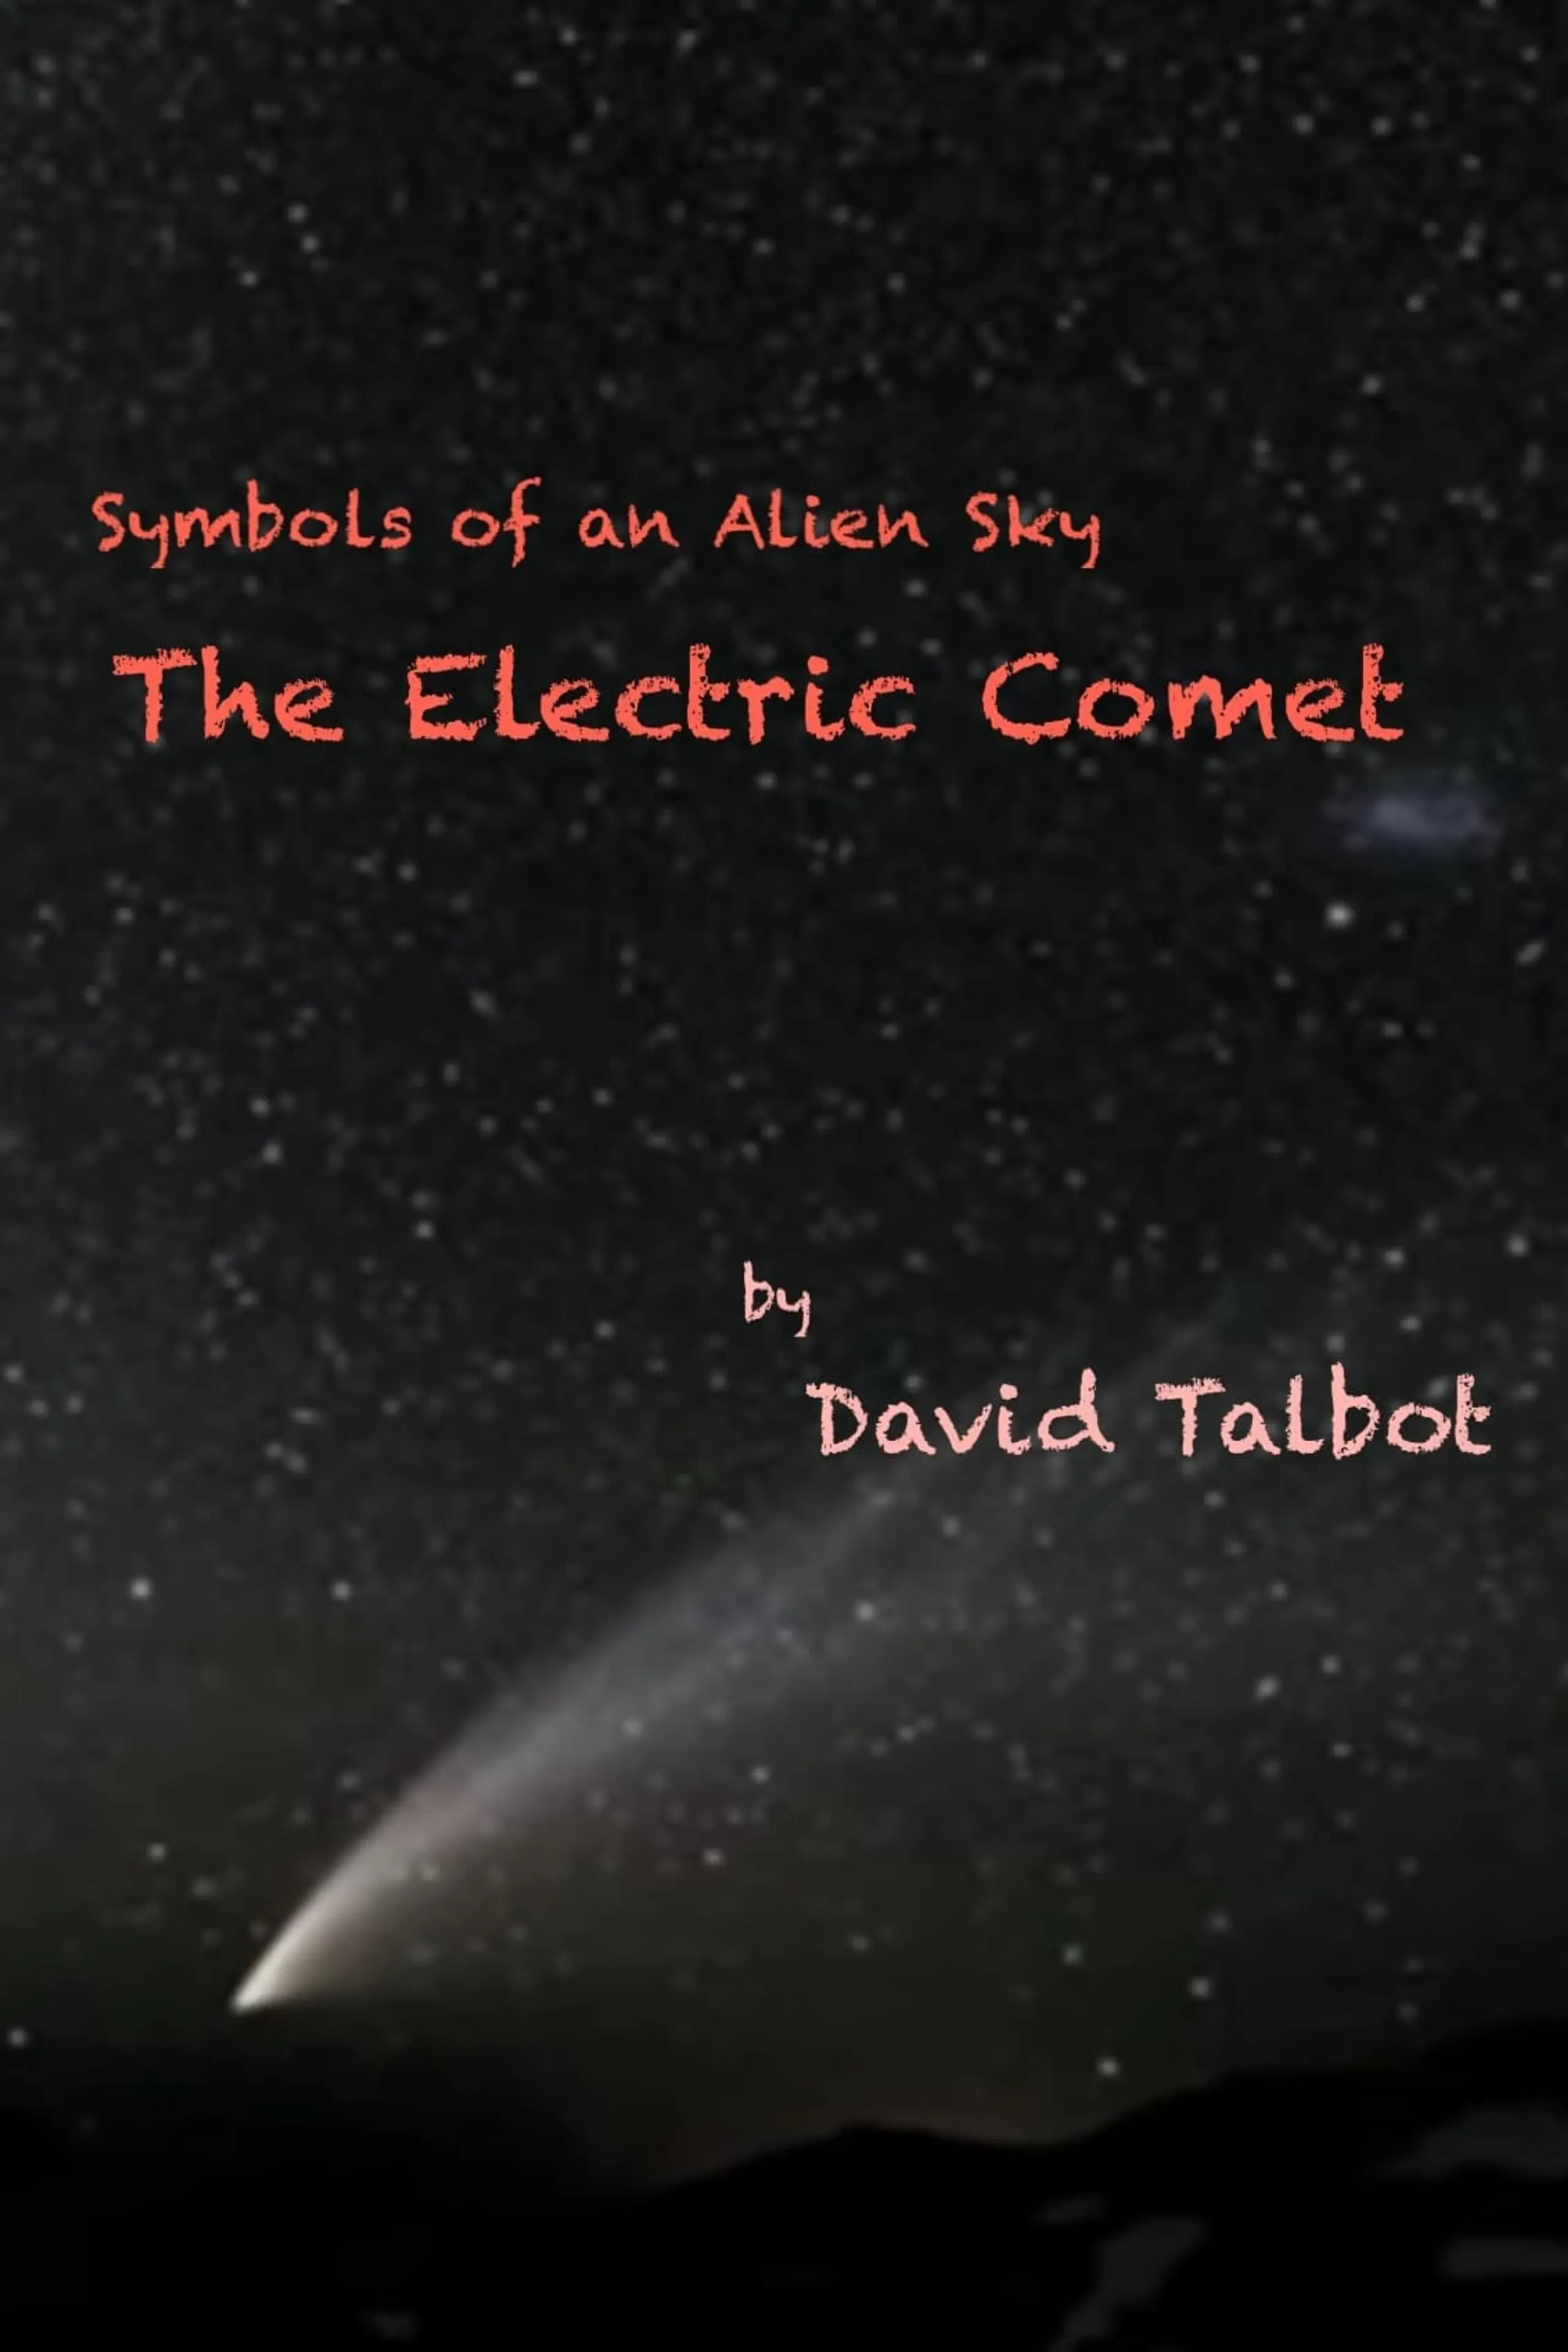 The Electric Comet